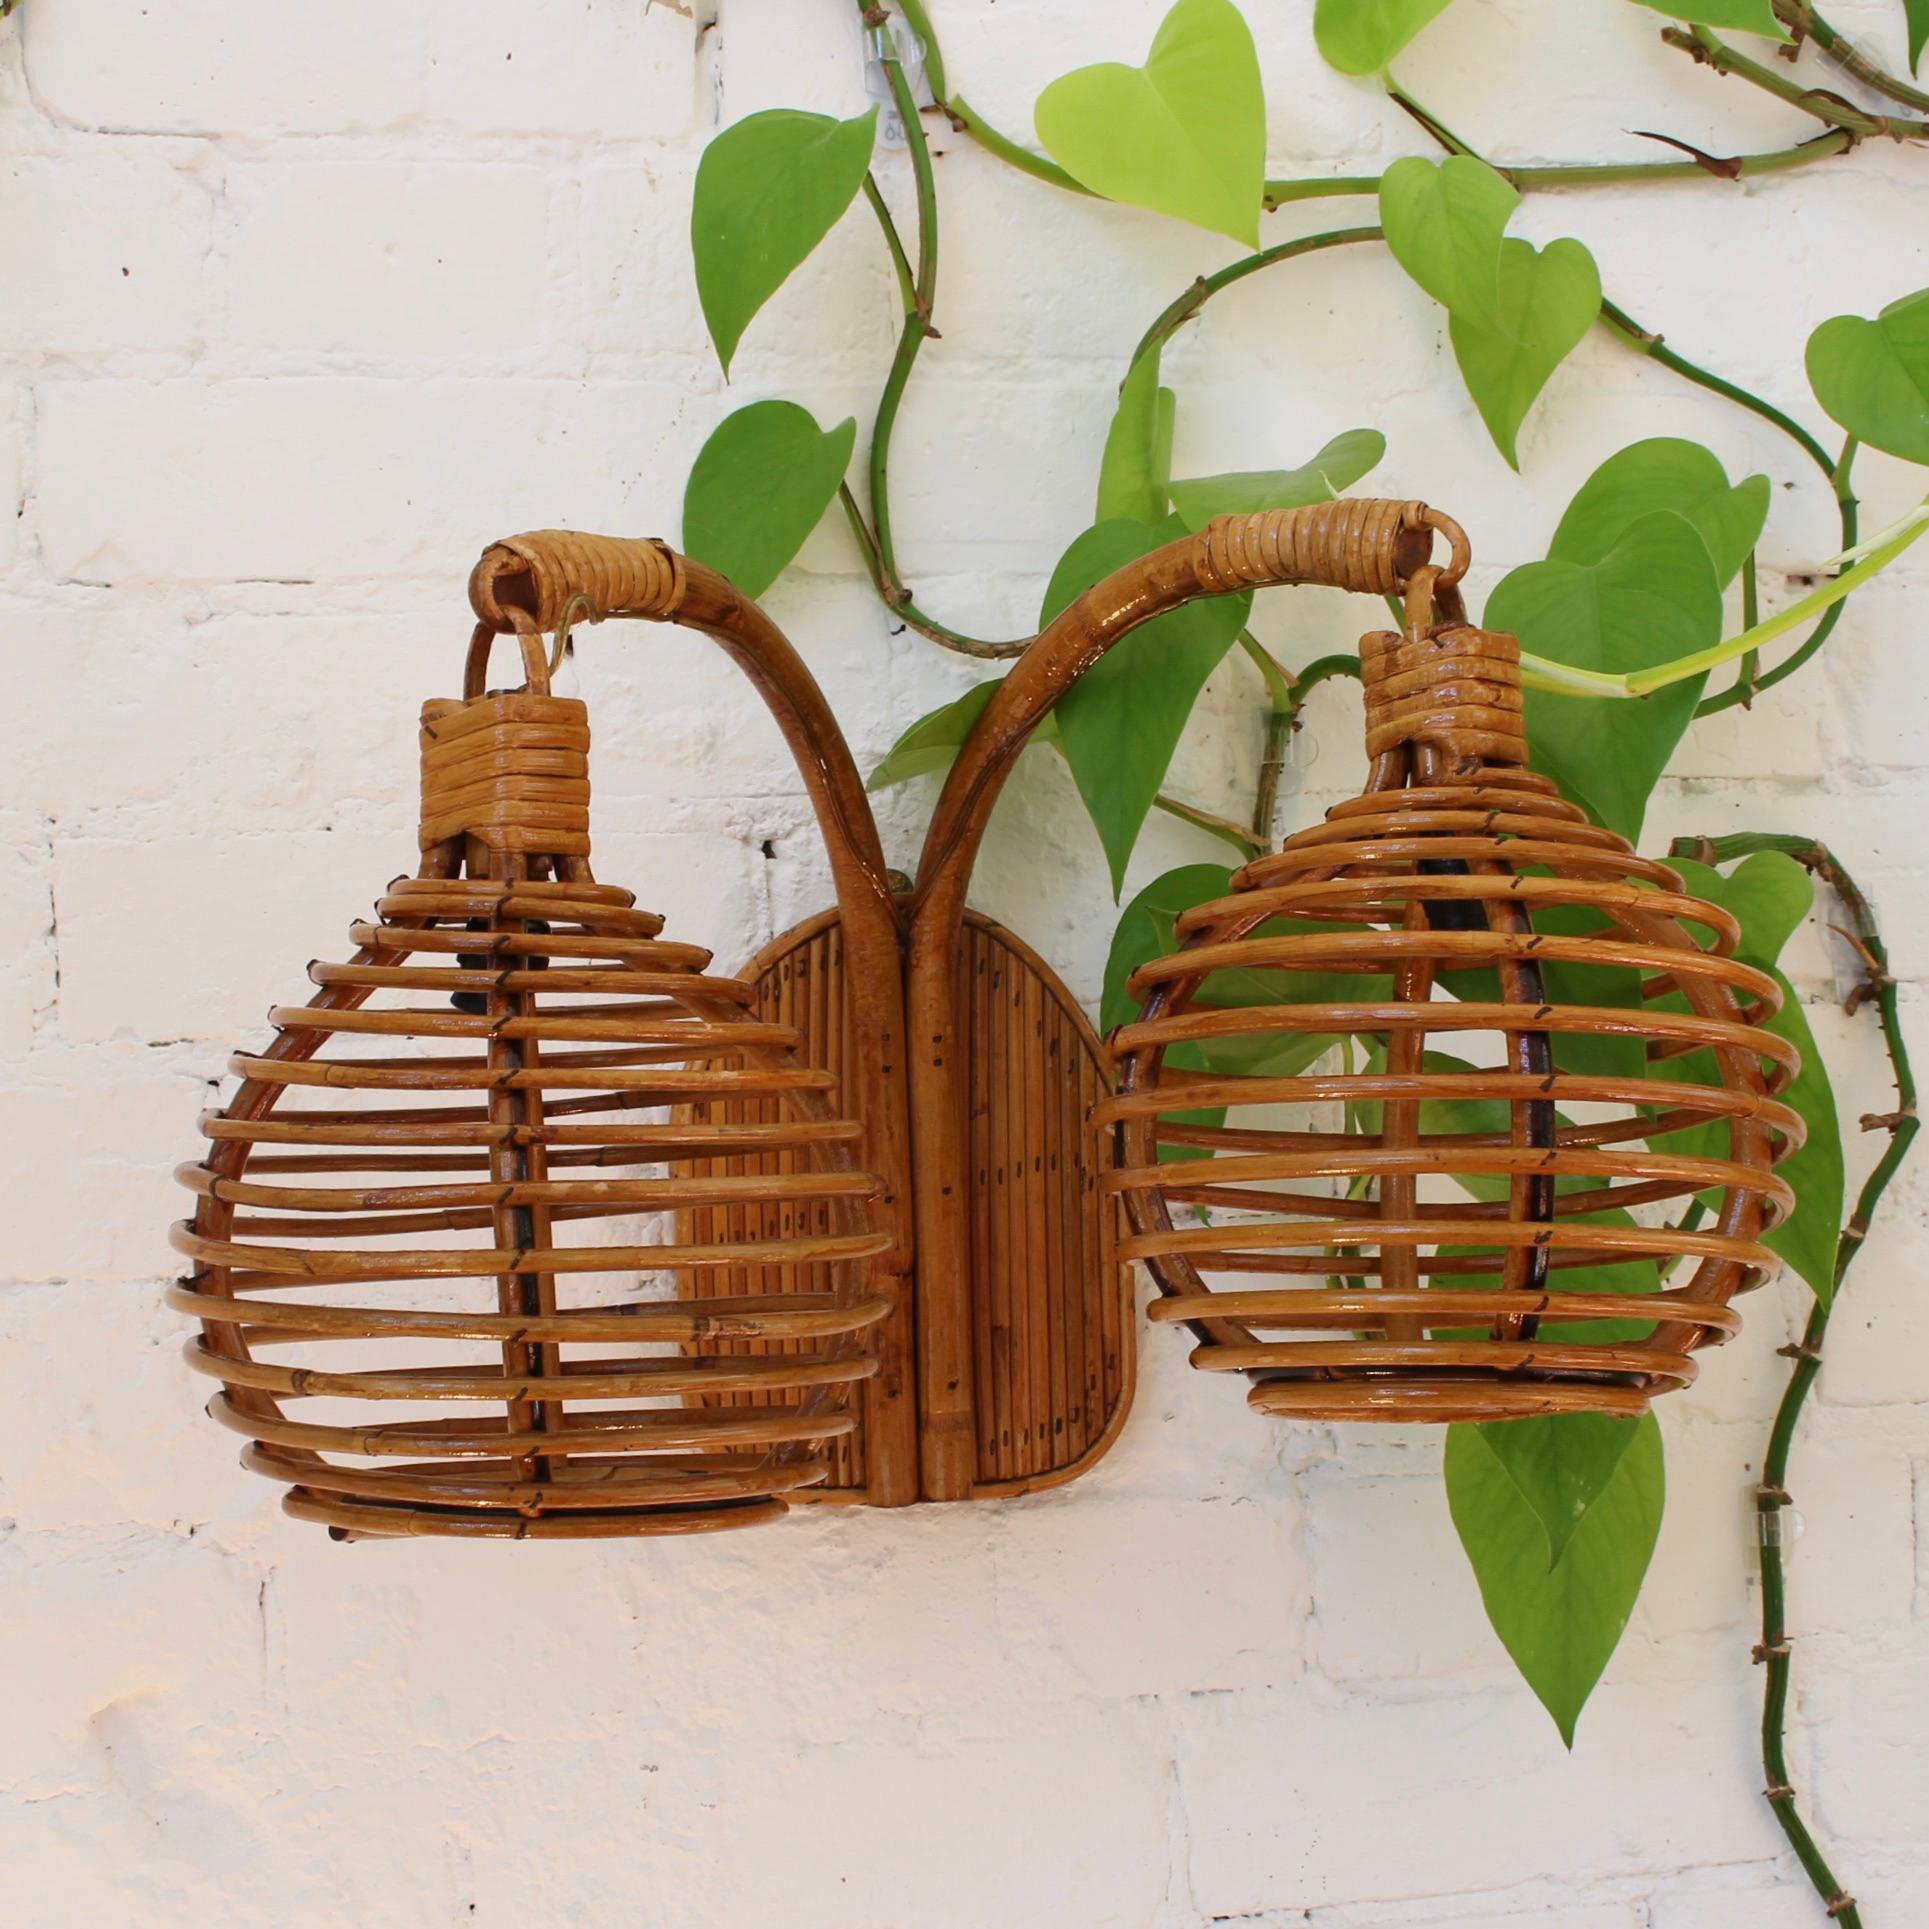 Midcentury Italian rattan wall lights (circa 1960s). Delightfully original, this piece transports you to the Italian Riviera at the height of its glamour. Fixed to the wall with its vertical base, two sensuously curved canes extend outward and